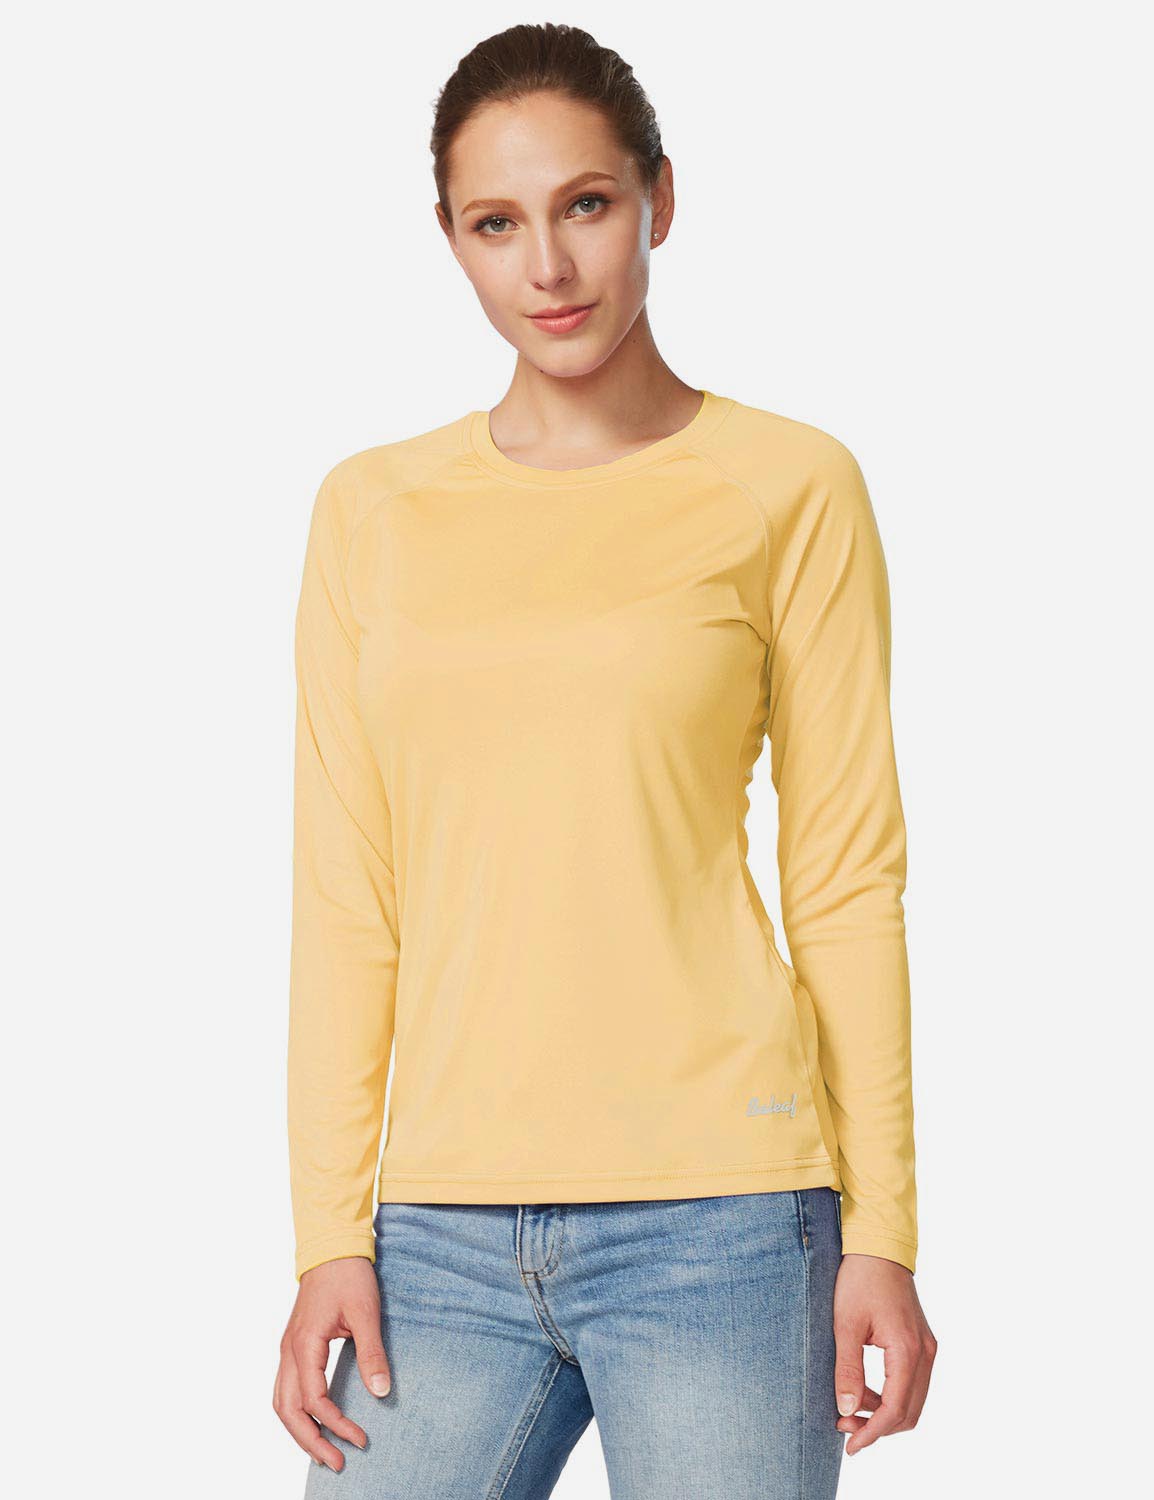 Baleaf Women's UPF50+ Loose Fit Crew Neck Casual Long Sleeved Shirt aga001 Yellow Front